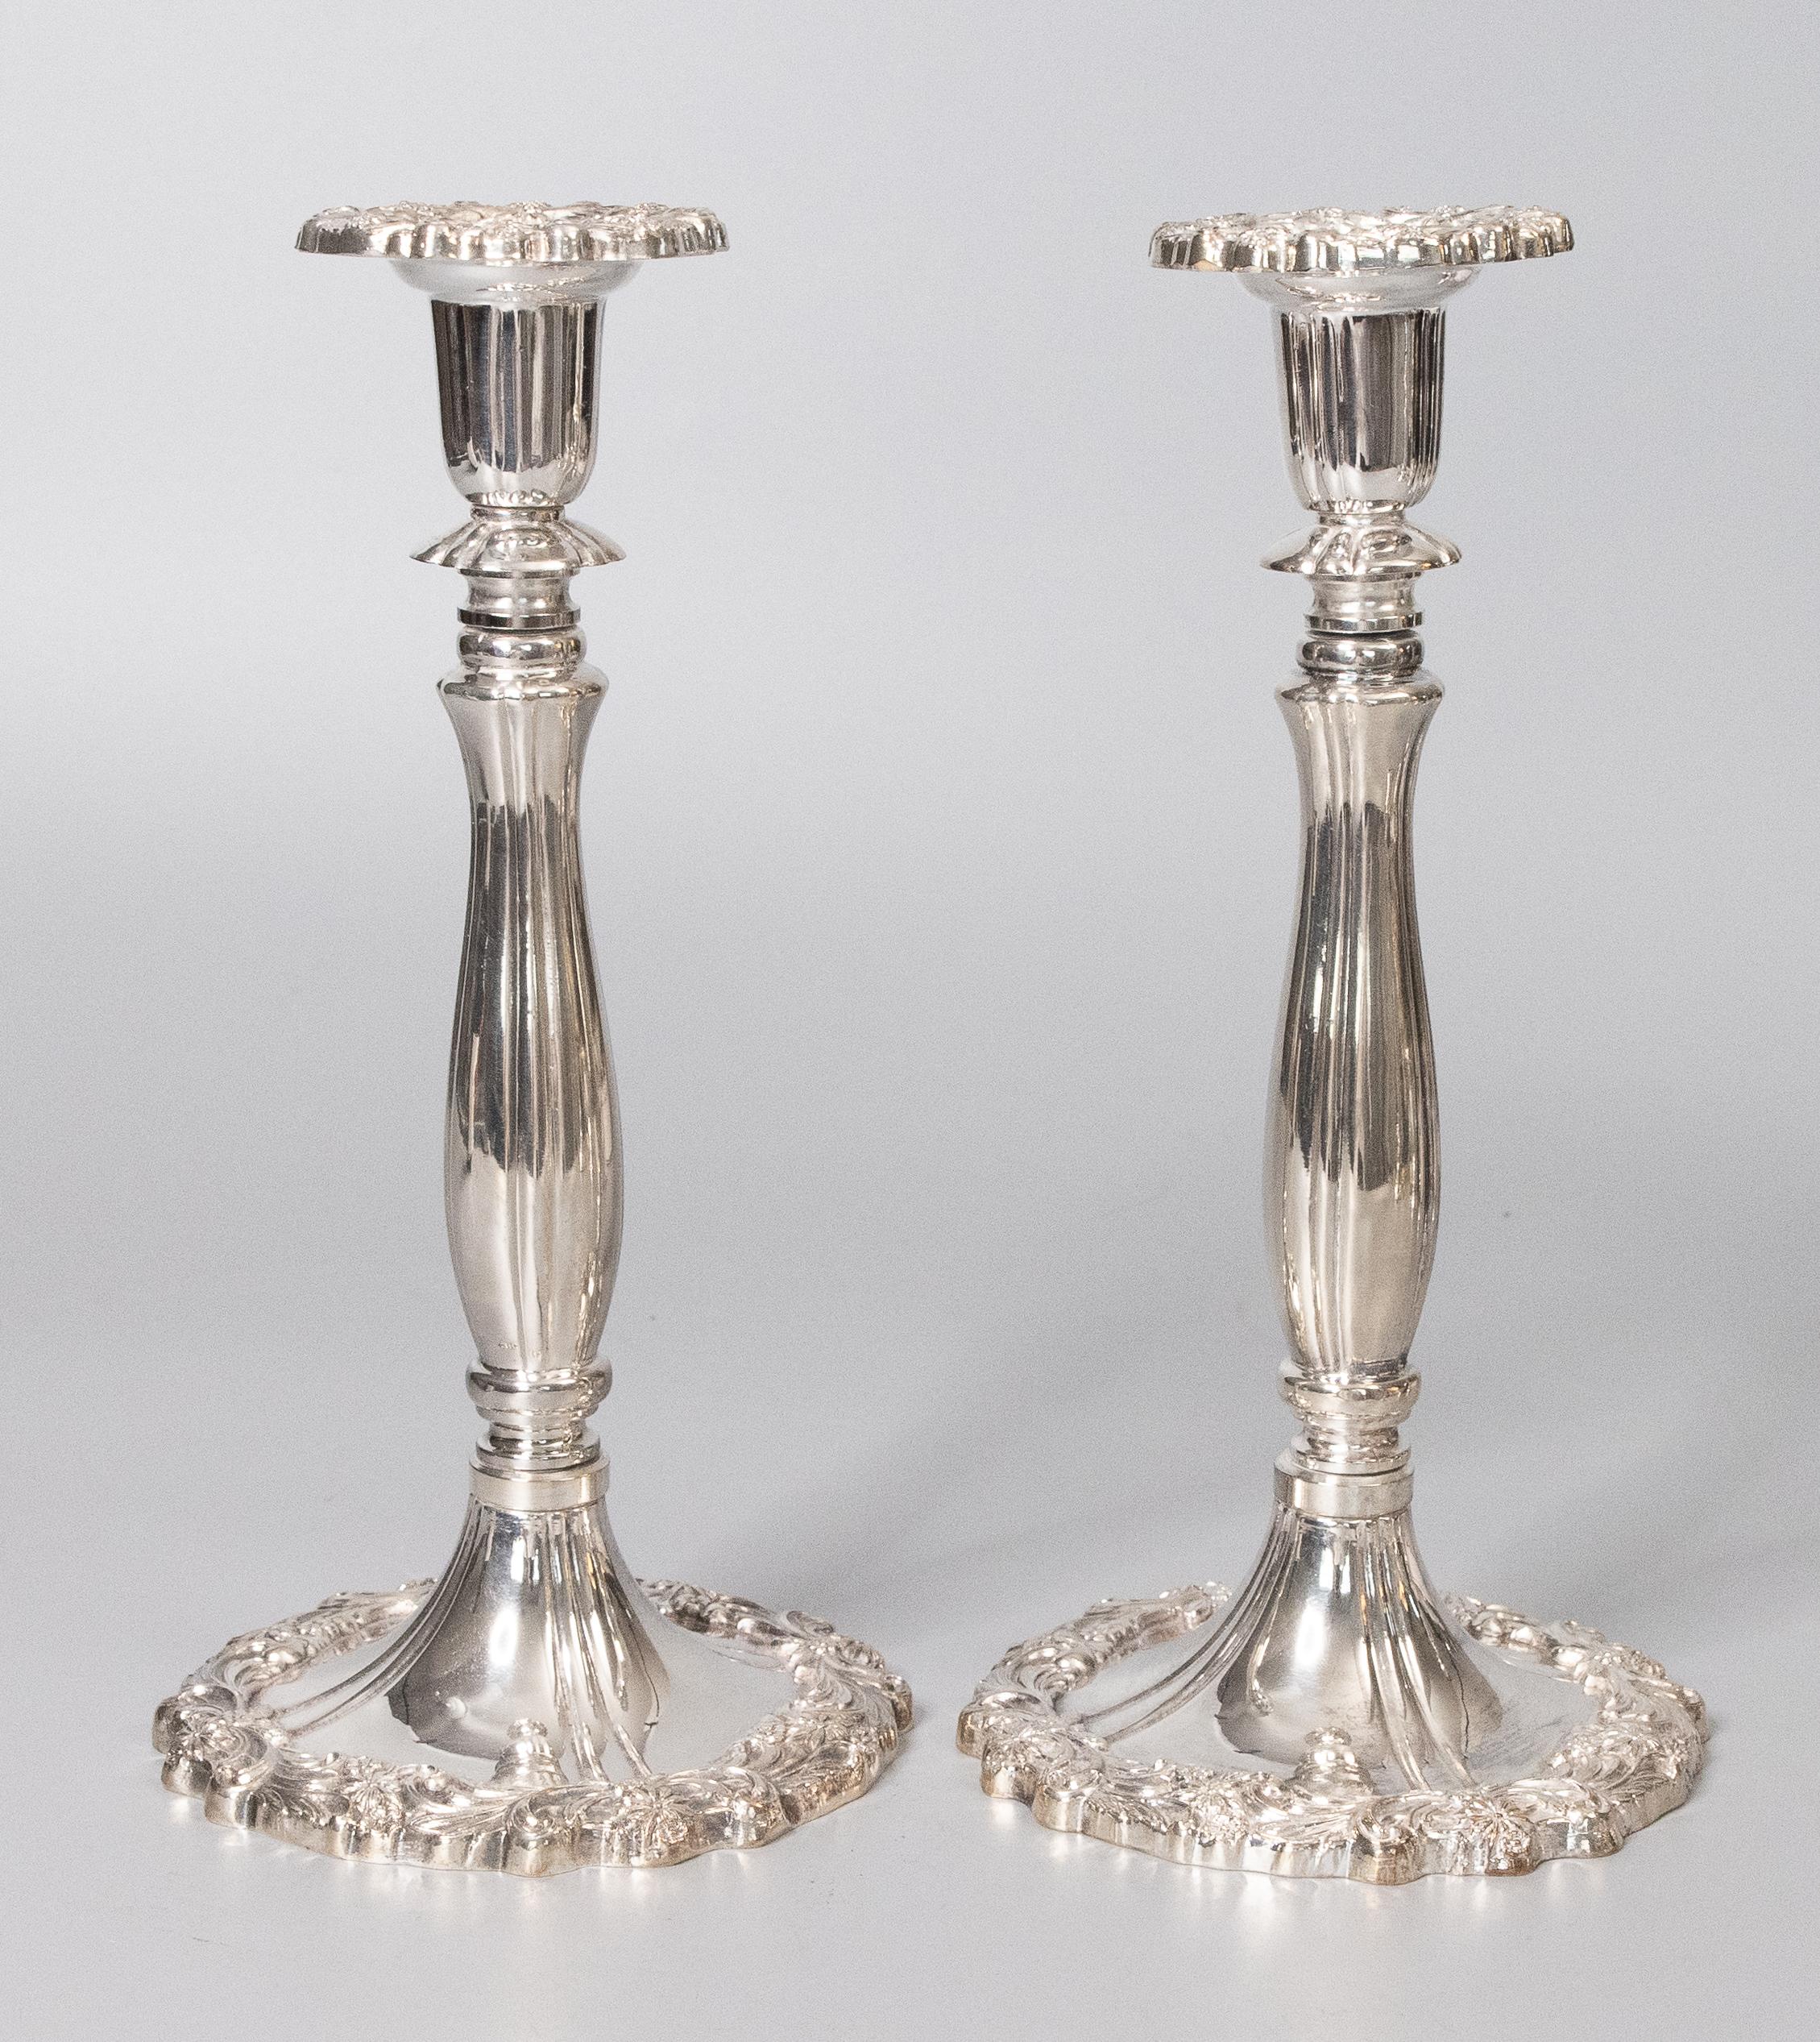 A stunning pair of vintage Mid-20th Century Rococo style silverplate candlesticks, made in Italy. Maker's mark on reverse. These gorgeous candle holders are a nice tall size and heavy with an ornate design.

Dimensions
5.25